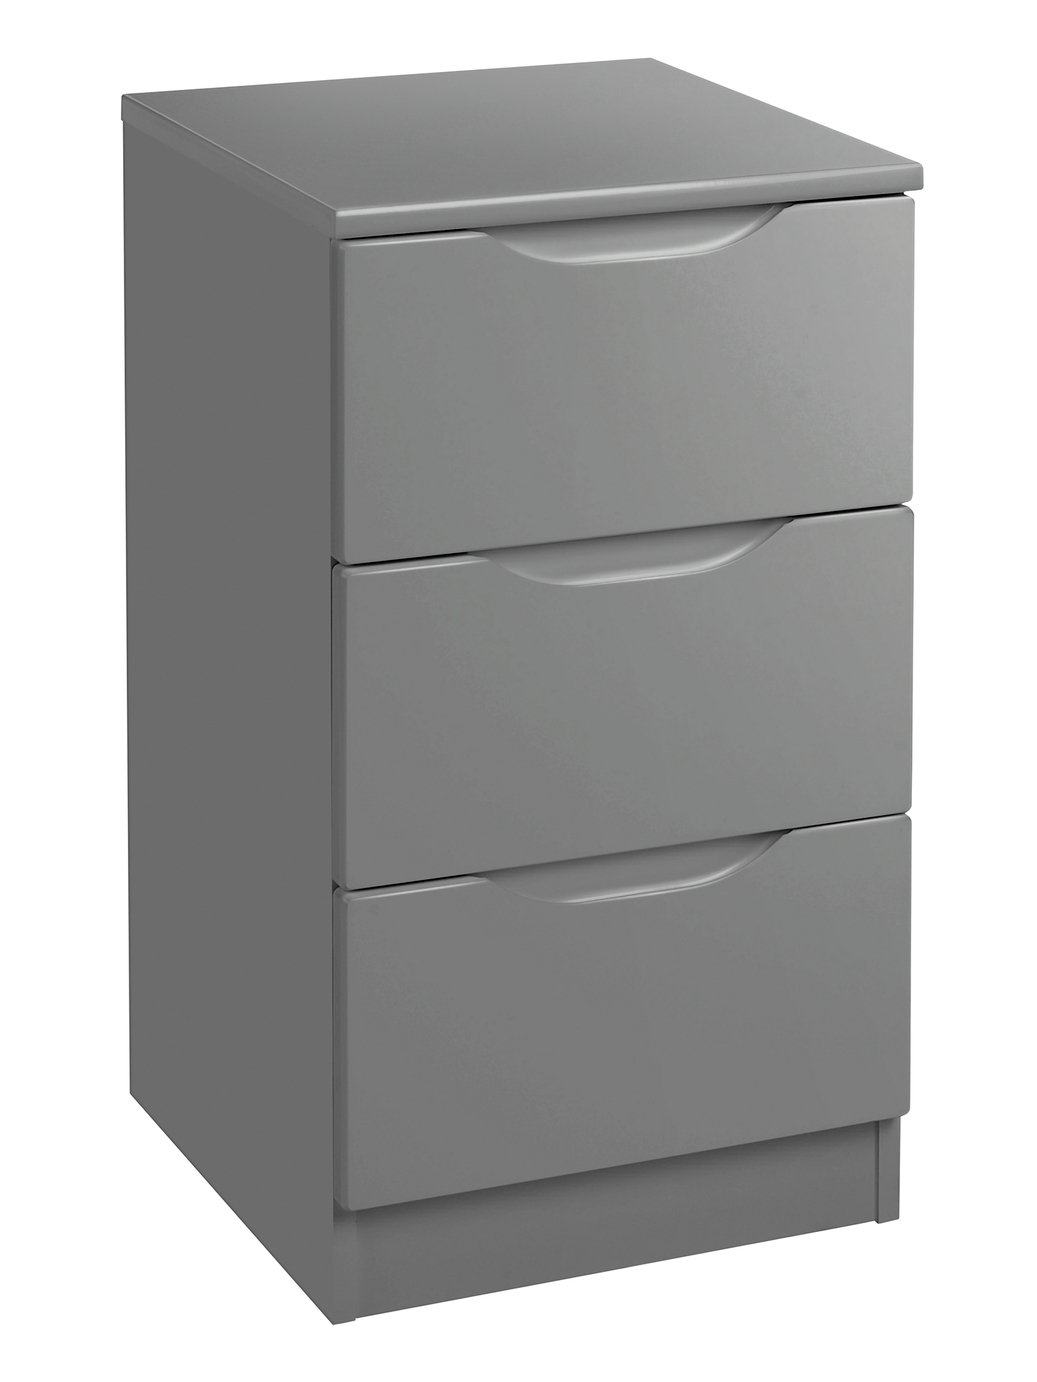 One Call Legato Gloss 3 Drawer Bedside Table - Dark Grey